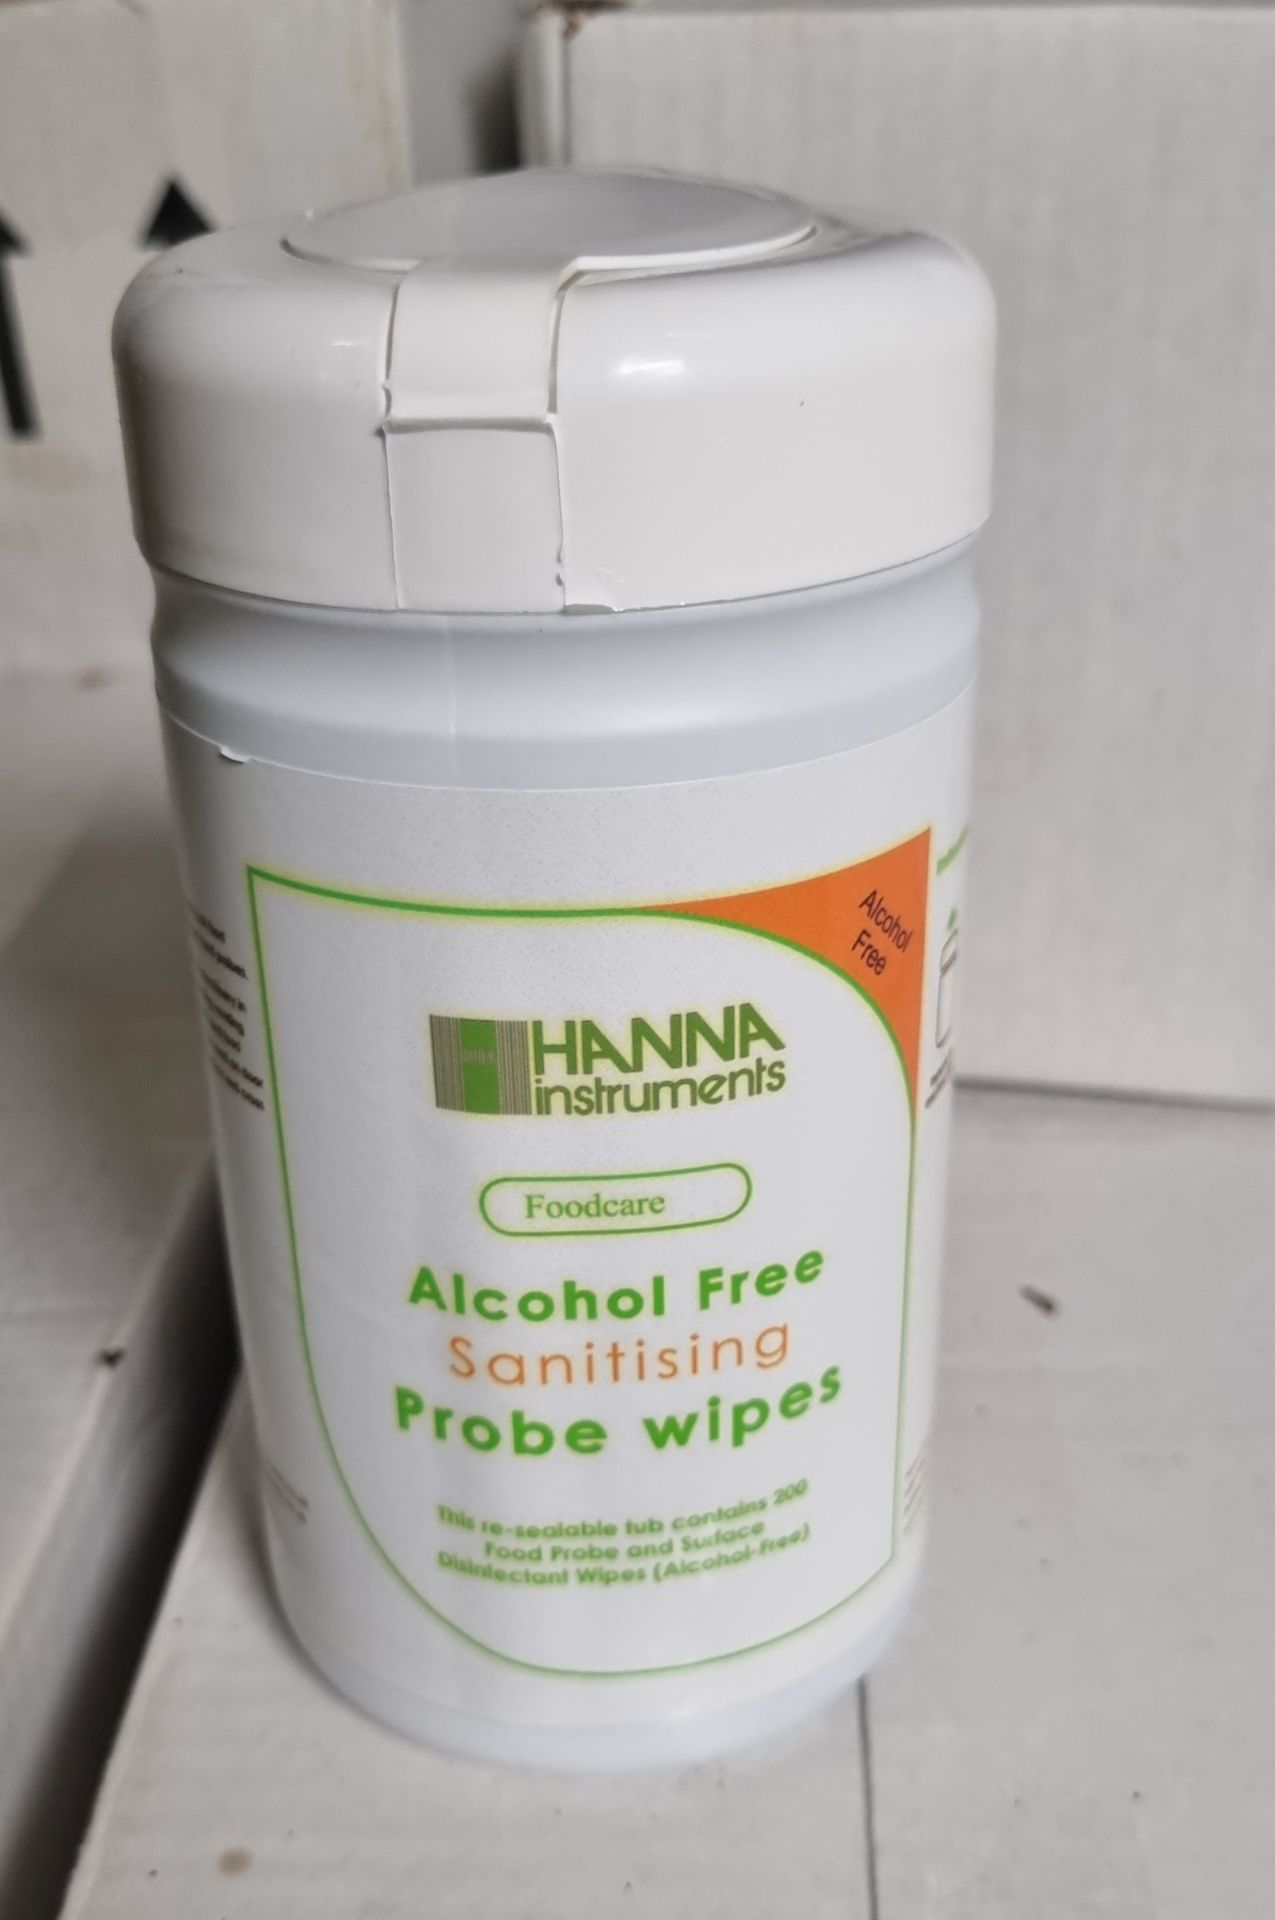 36x Boxes of Henna alcohol free wipes - probe wipes - 10x tubs per box (300 tubs) - Image 3 of 3